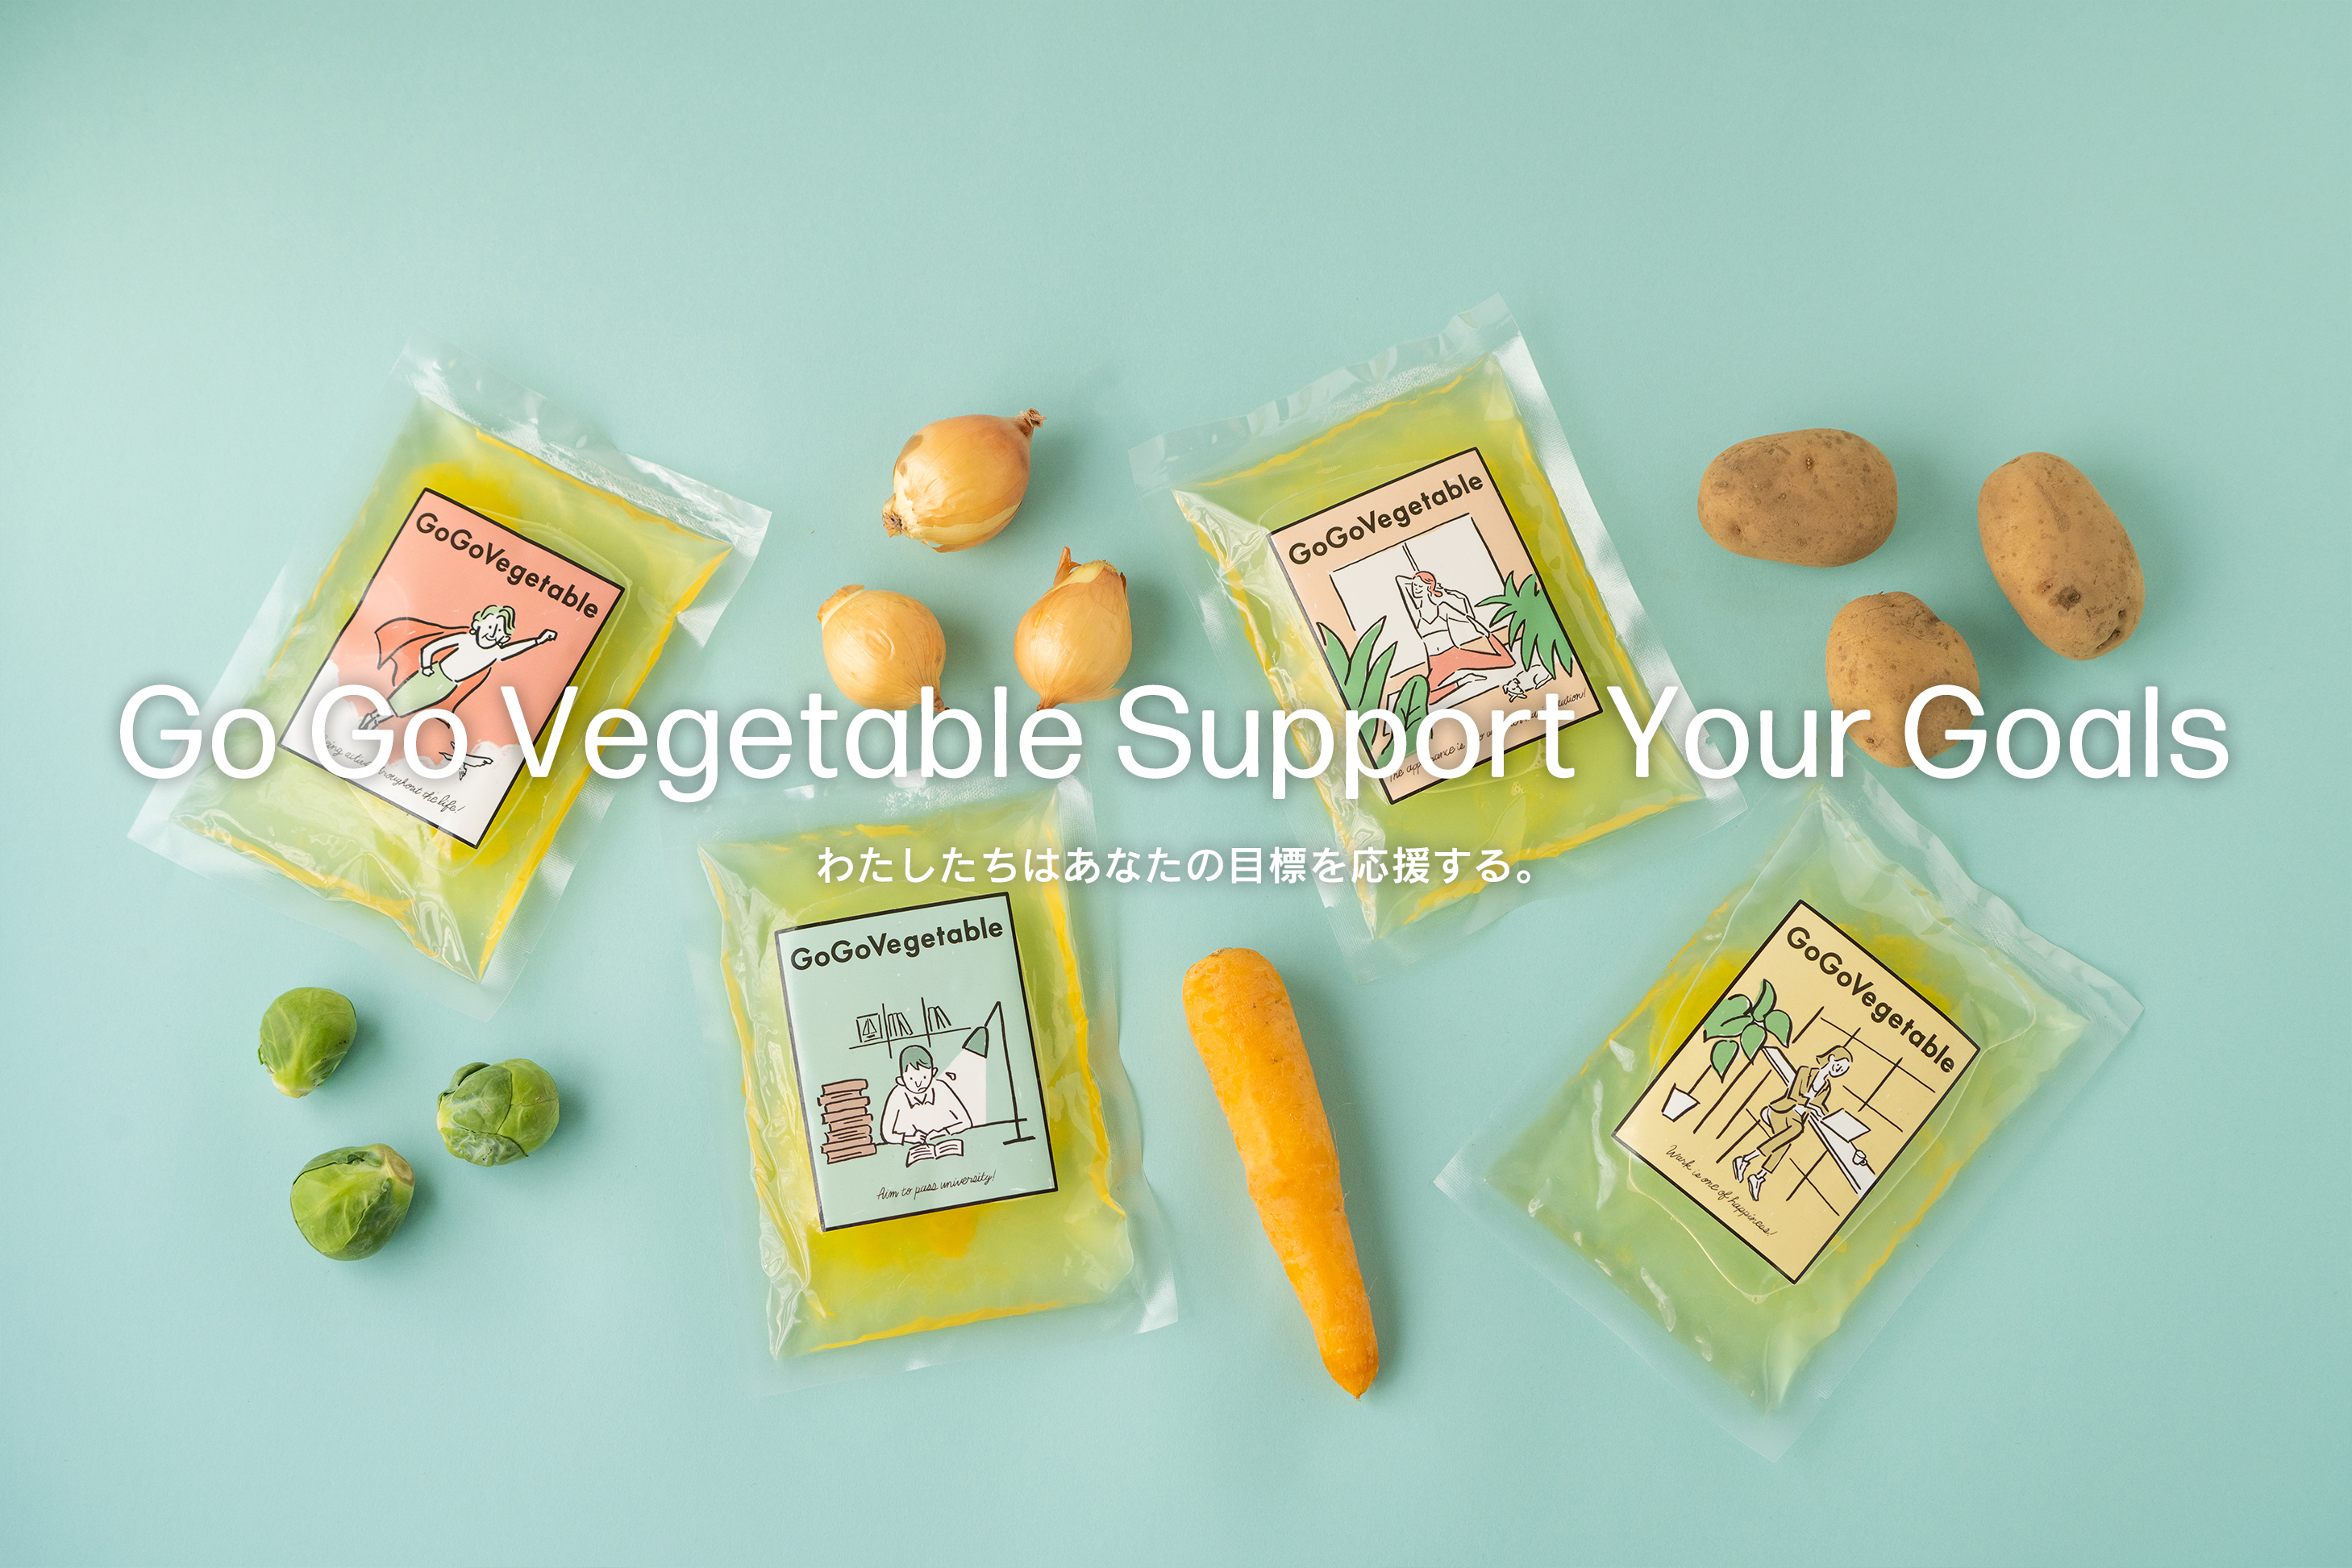 Go Go Vegetable Support Your Goals